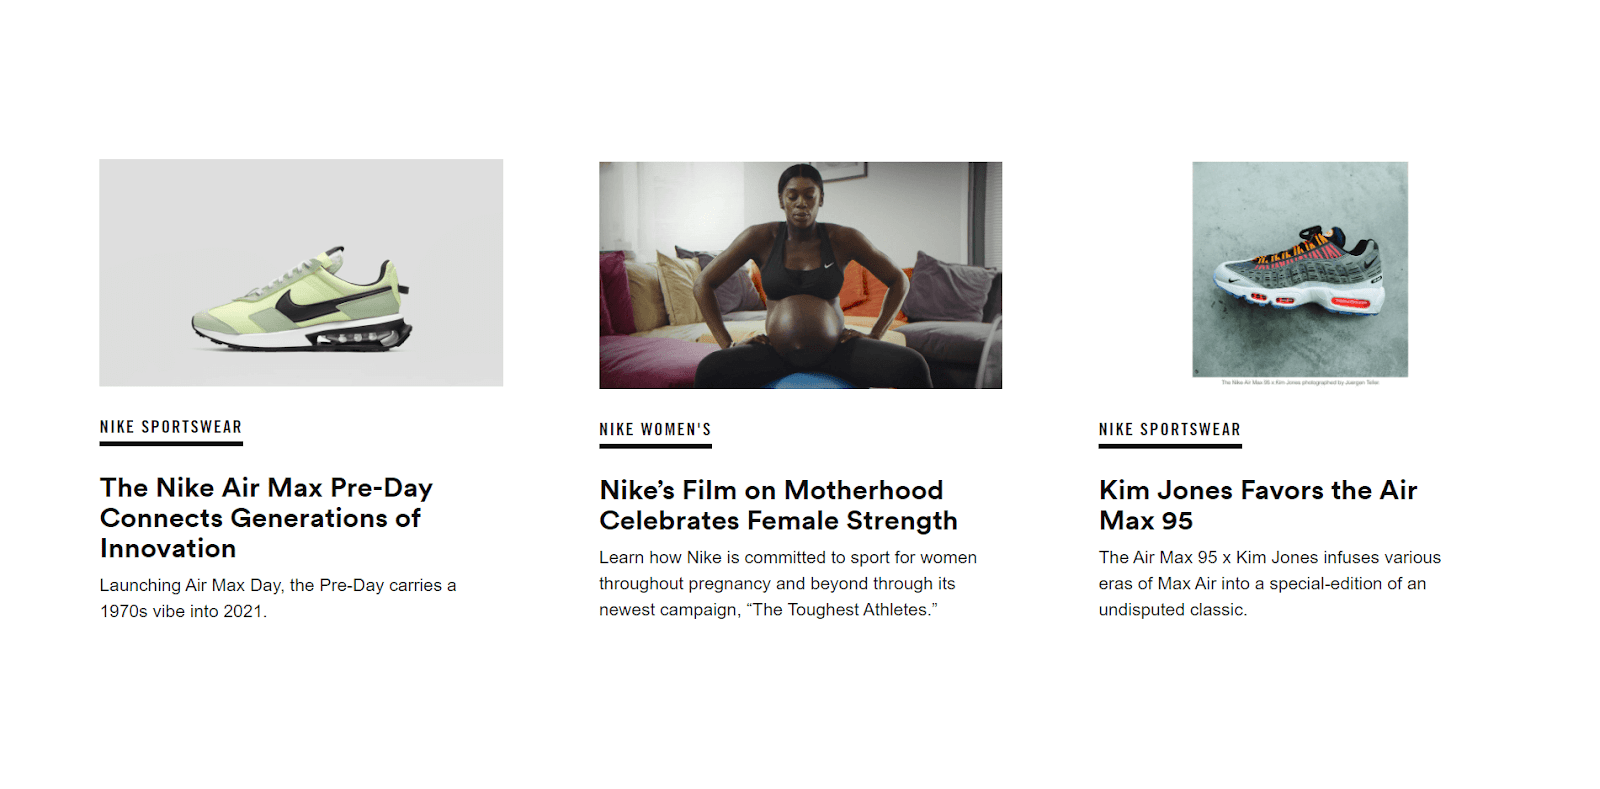 The Nike News blog. An article that "Celebrates Female Strength" is flanked by two promotional sneaker posts.